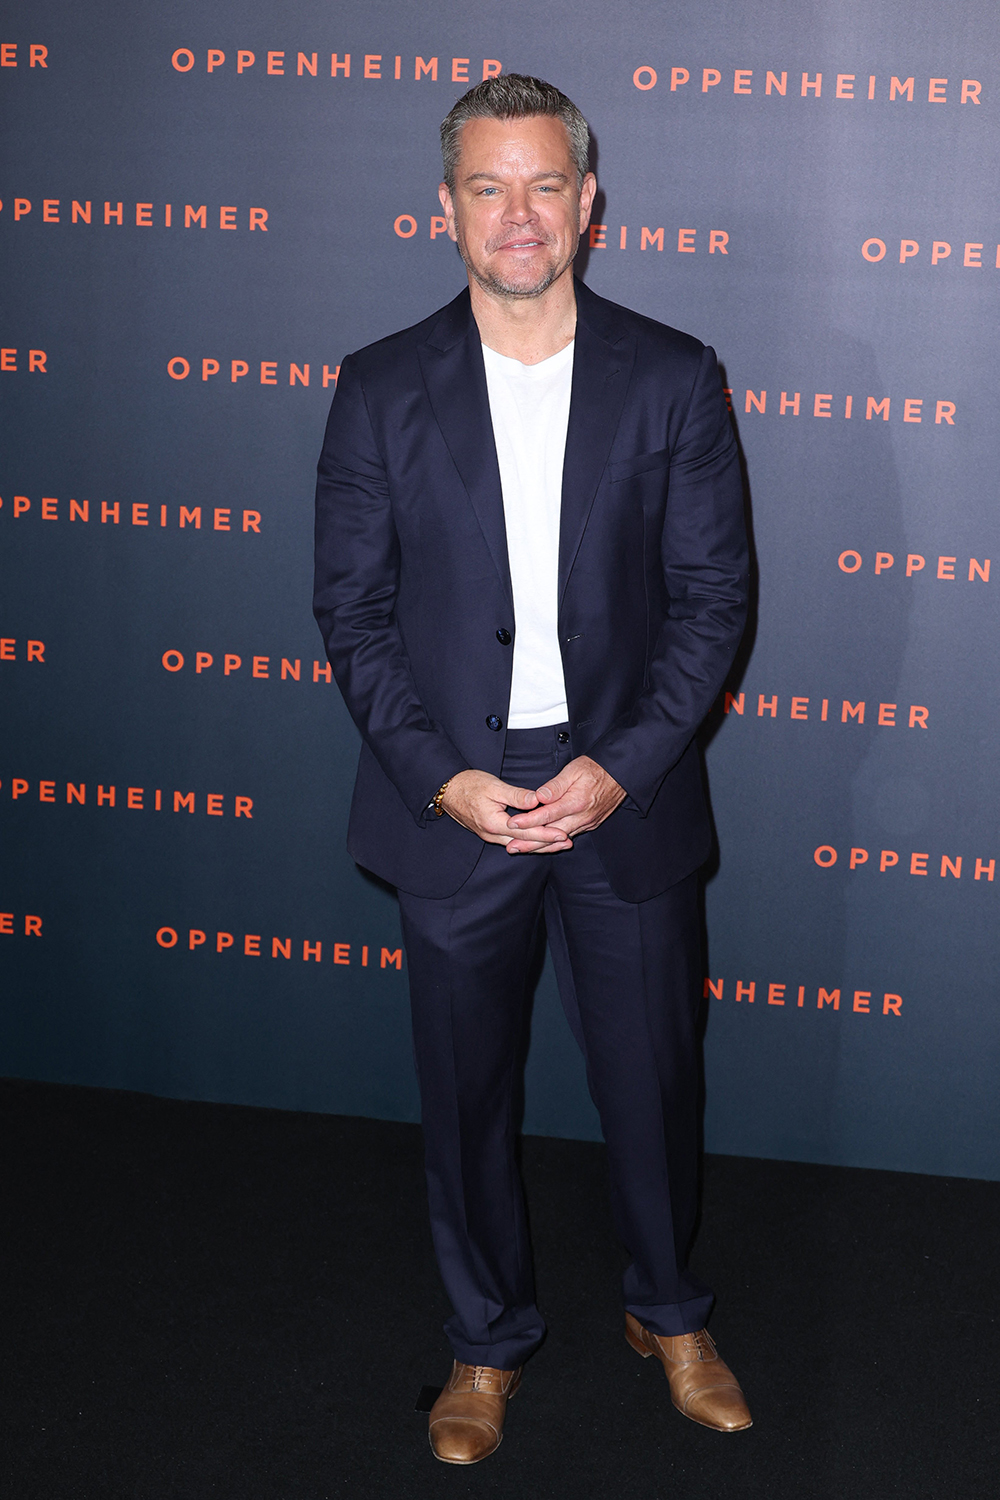 Matt Damon opted for a simple blue suit with a white tee shirt for the ‘Oppenheimer’ premiere in Paris. He finished the look with brown shoes.